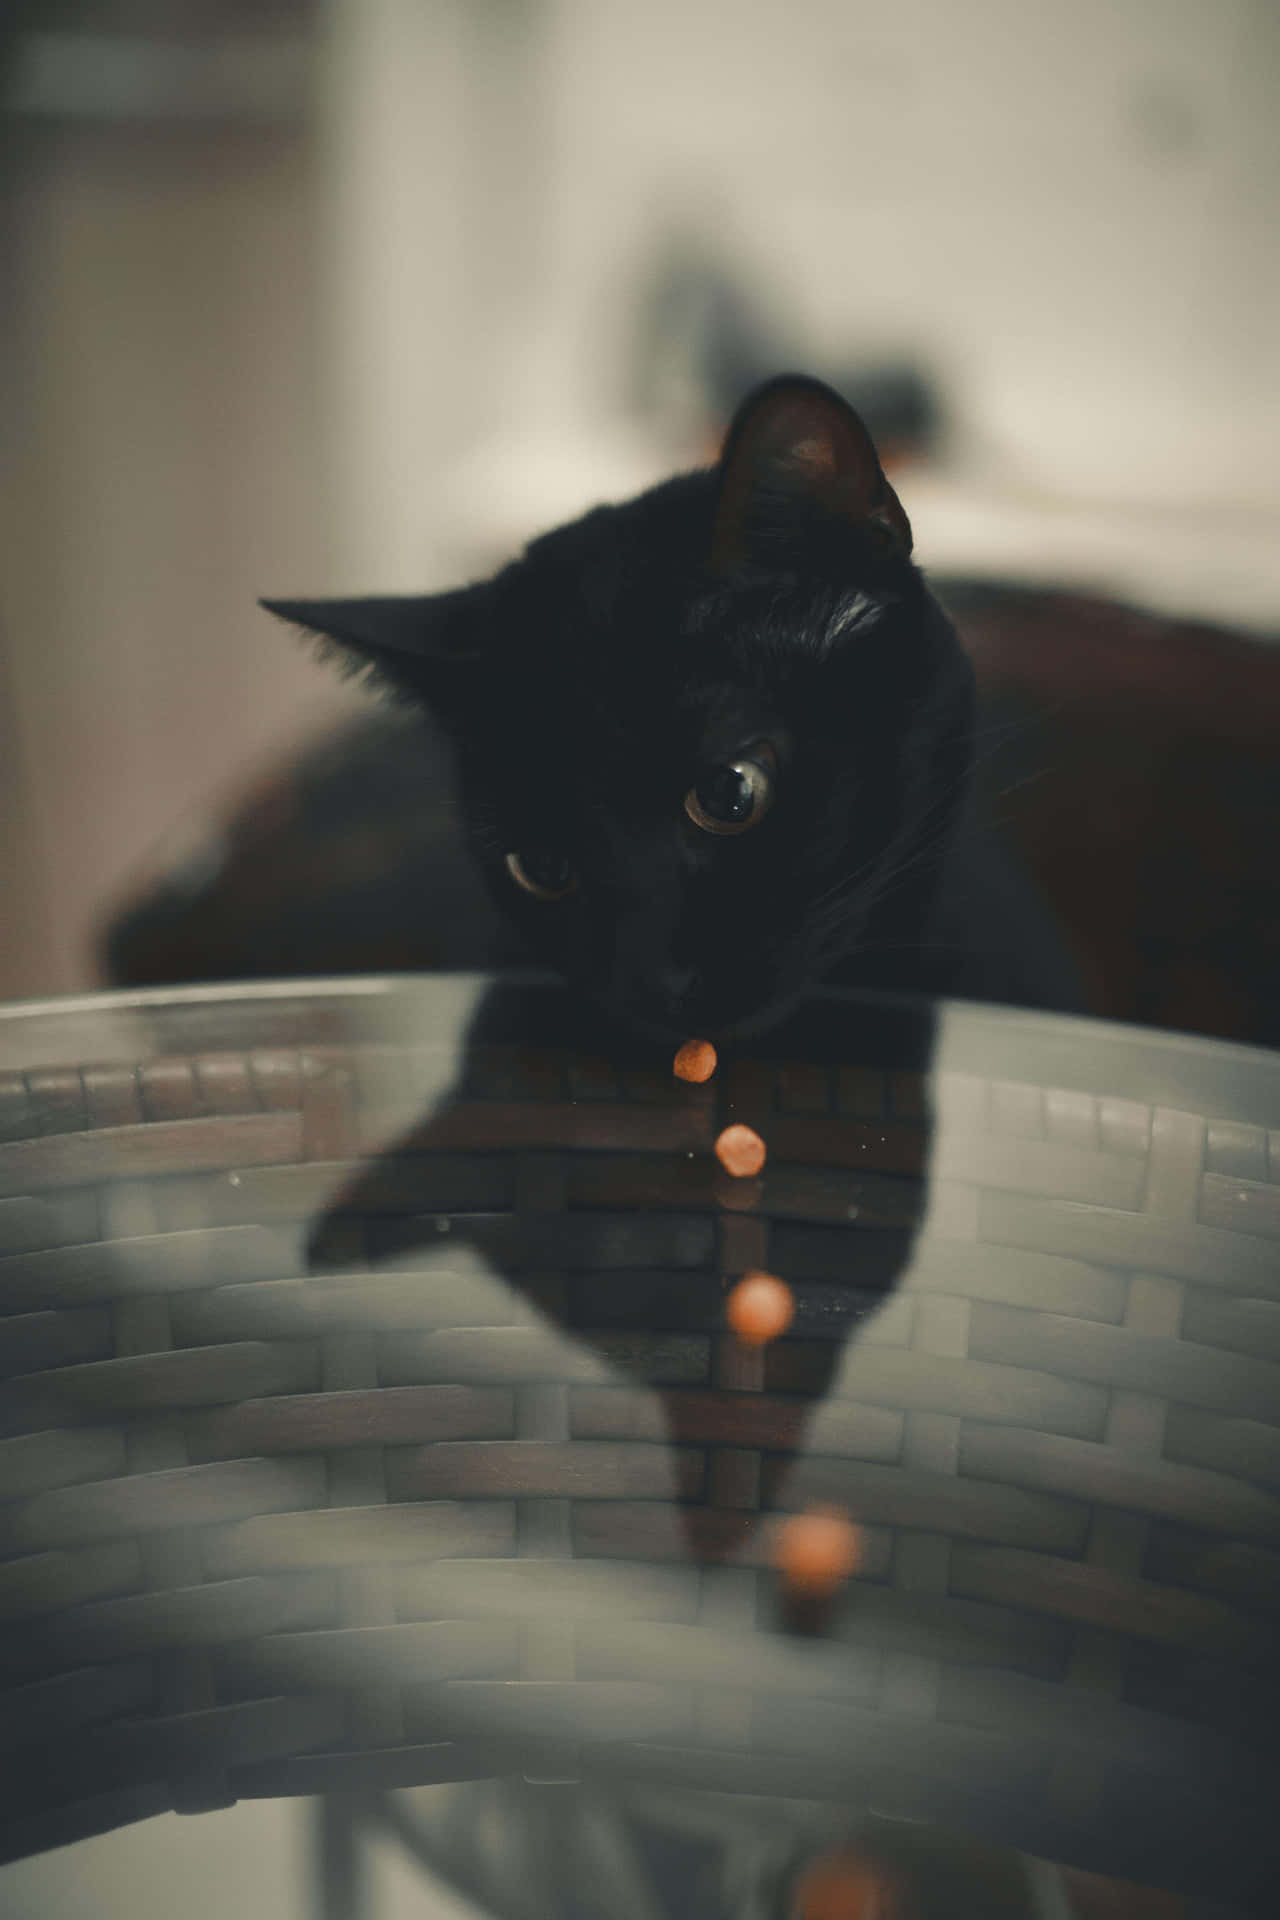 Mysterious Black Cat Reflection Wallpaper